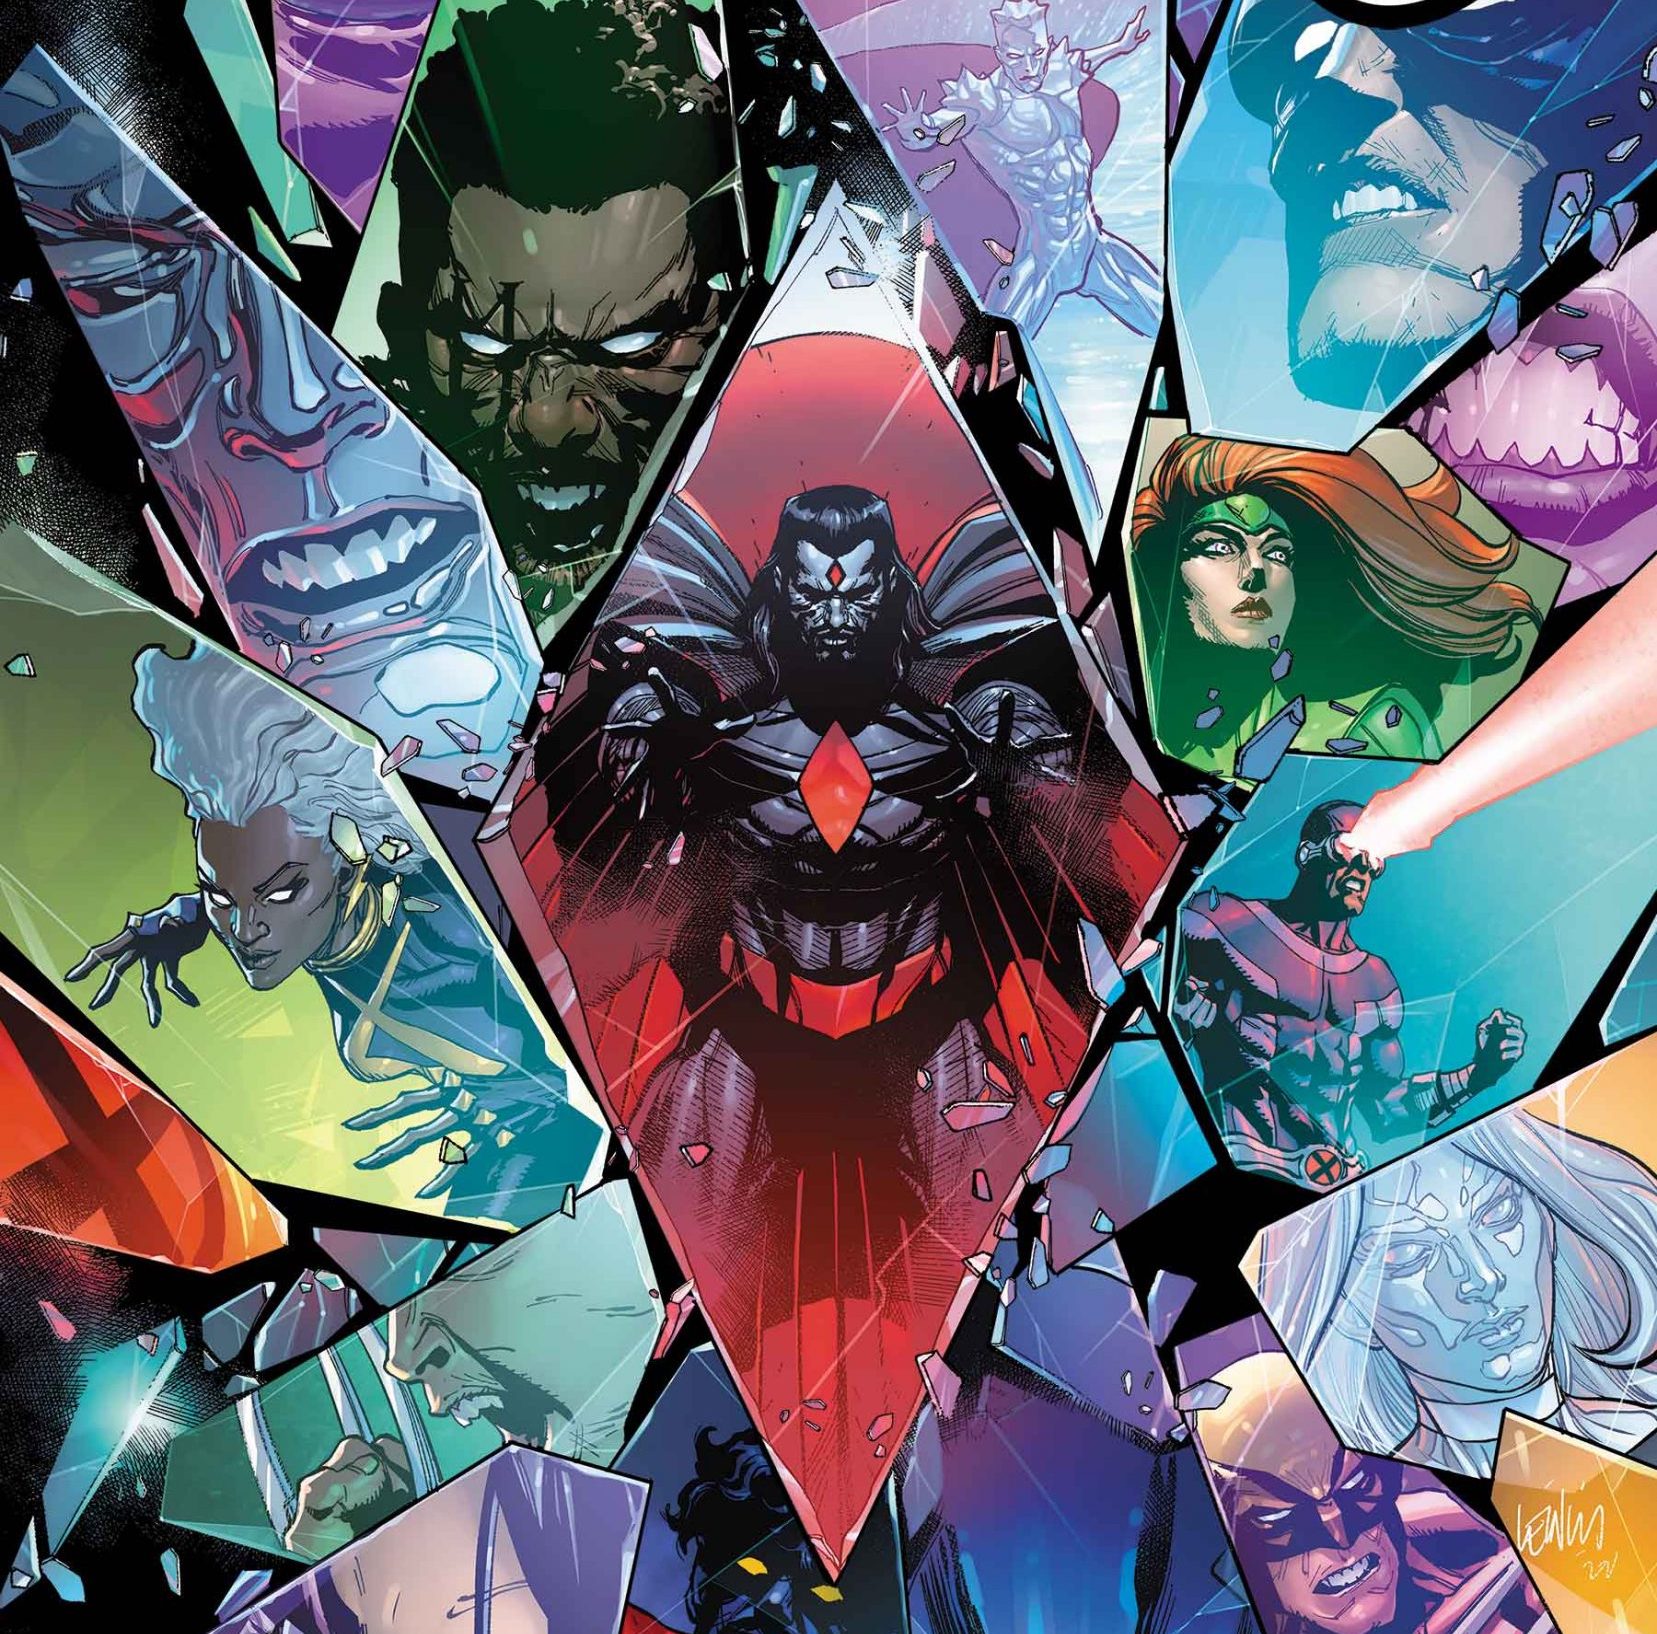 'Sins of Sinister' #1 sets things up while acting as a great event one-shot